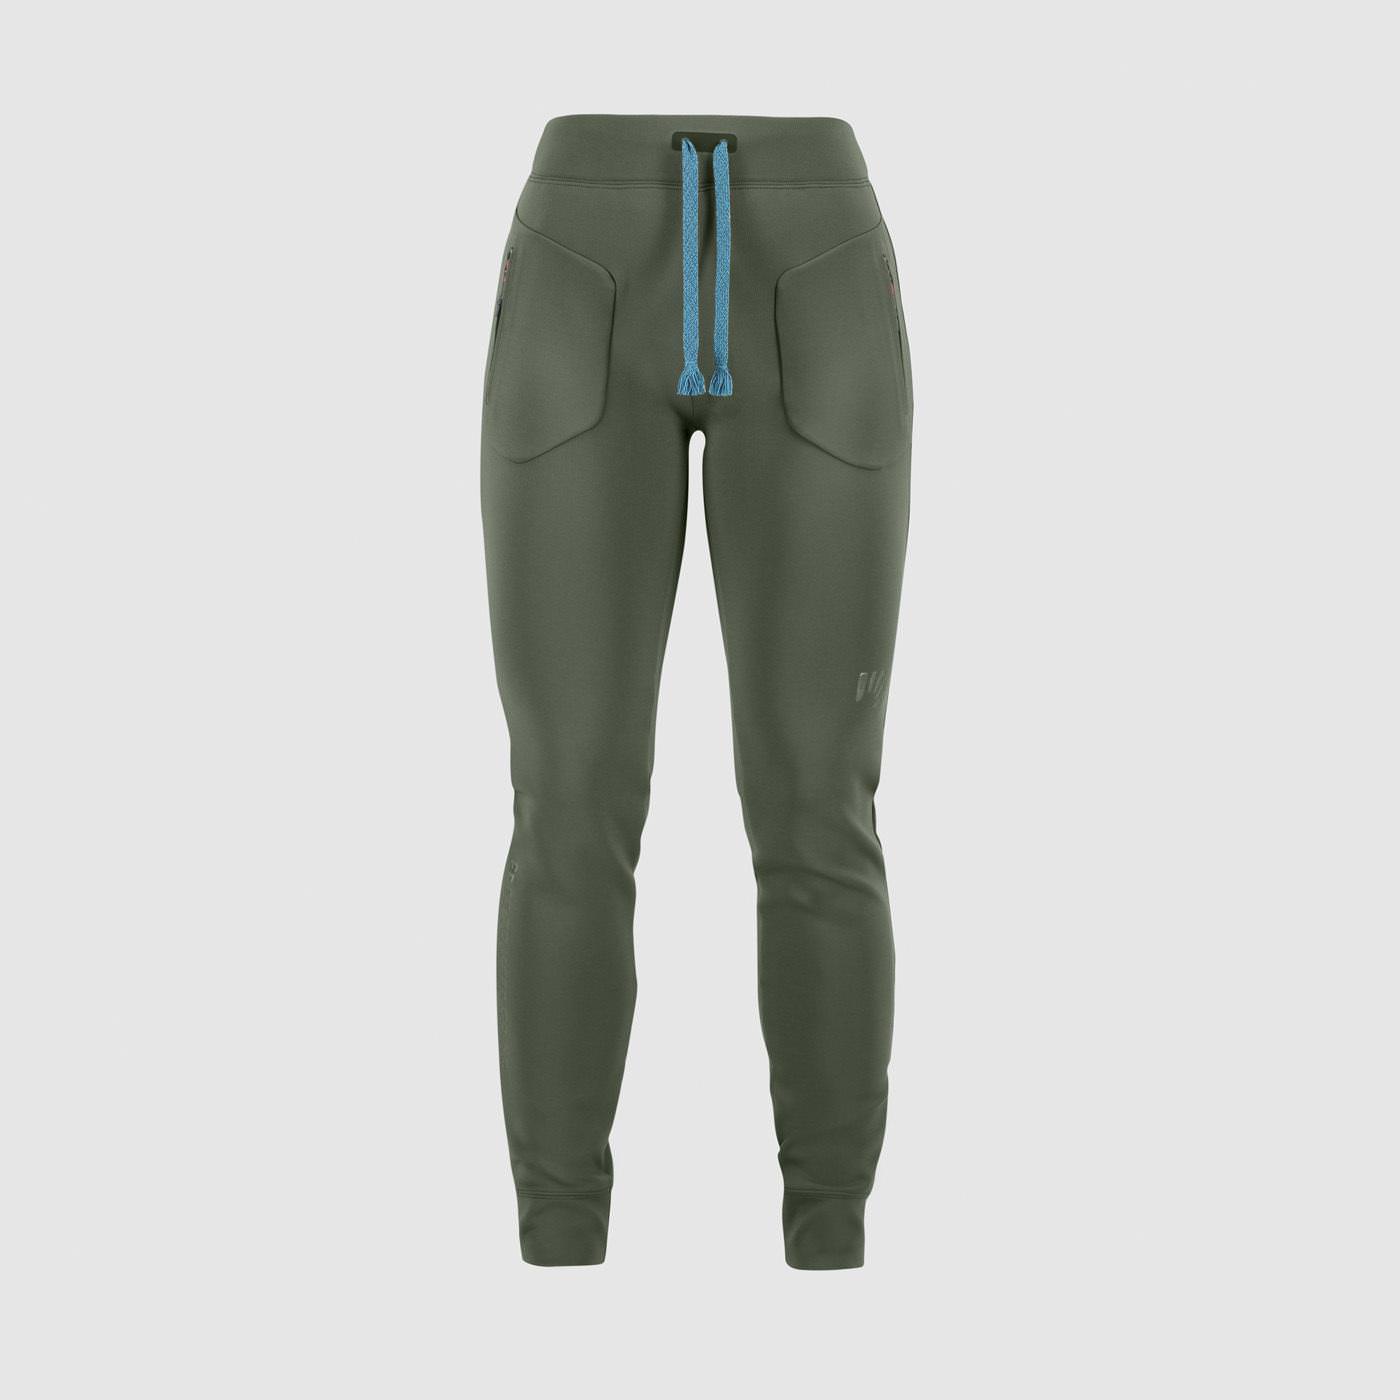 Under Armour Blue Cargo Pants for Women